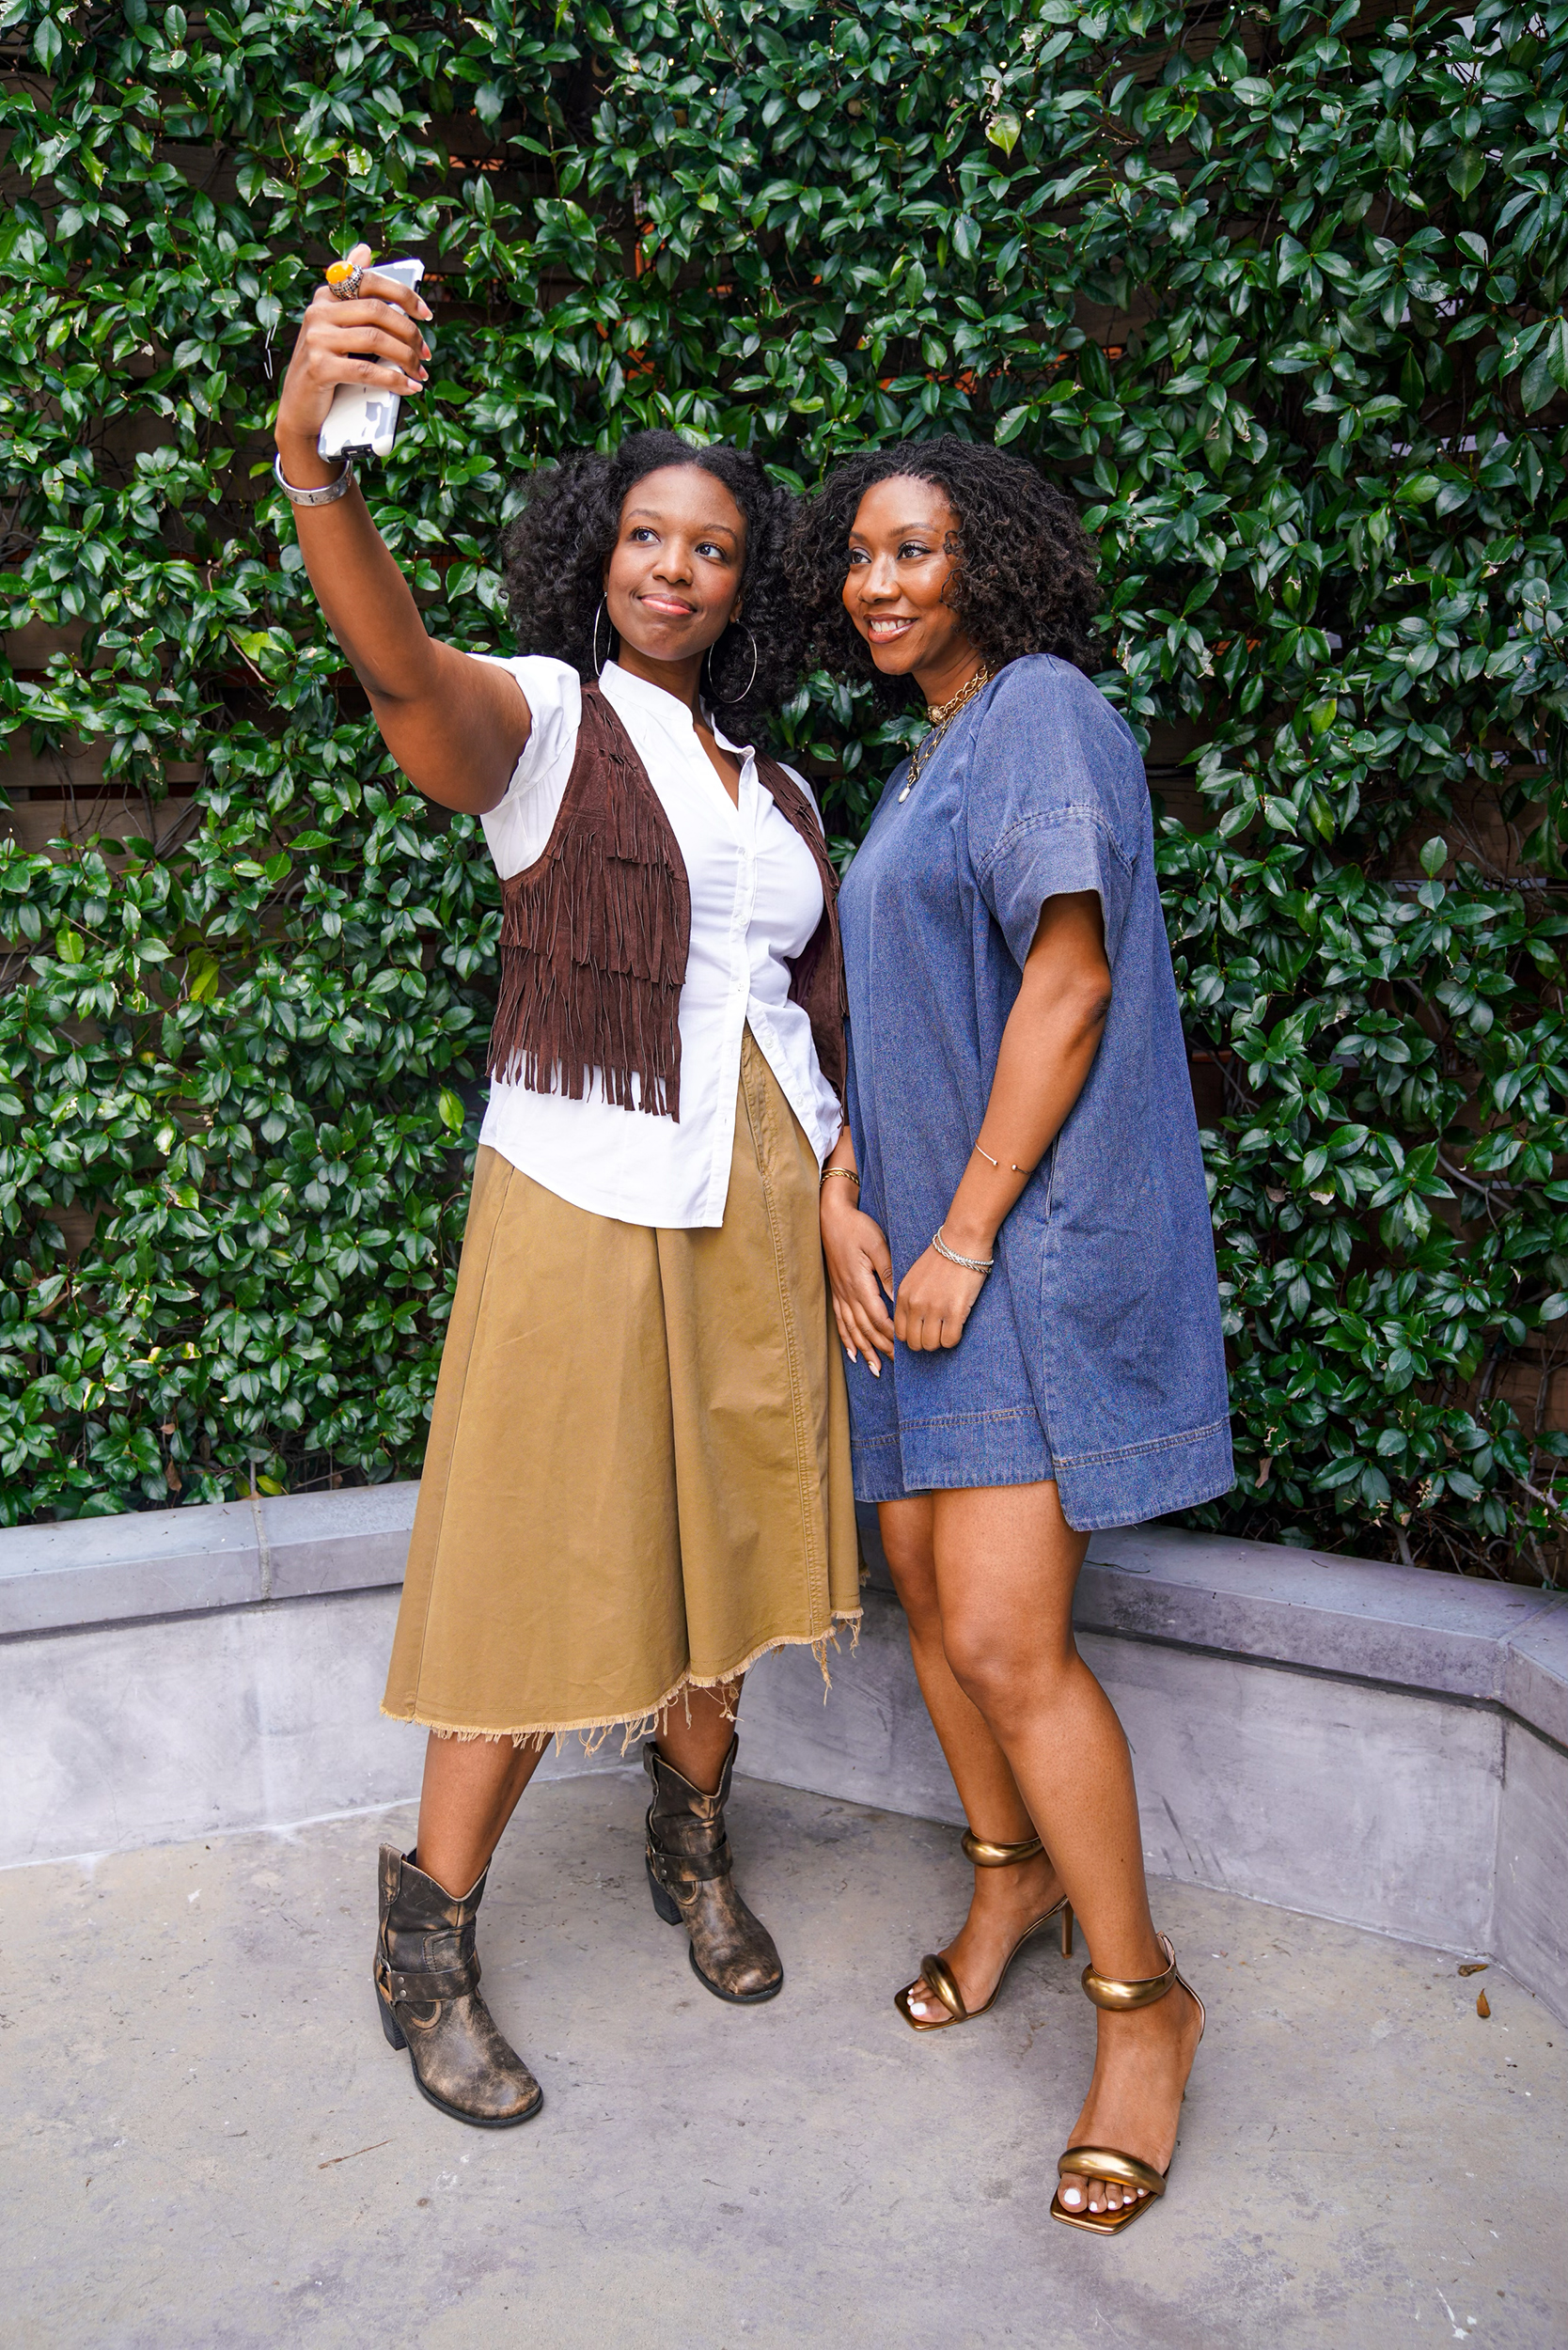 Two Black women are pictured in front of a green backdrop taking a selfie together with a cellphone.